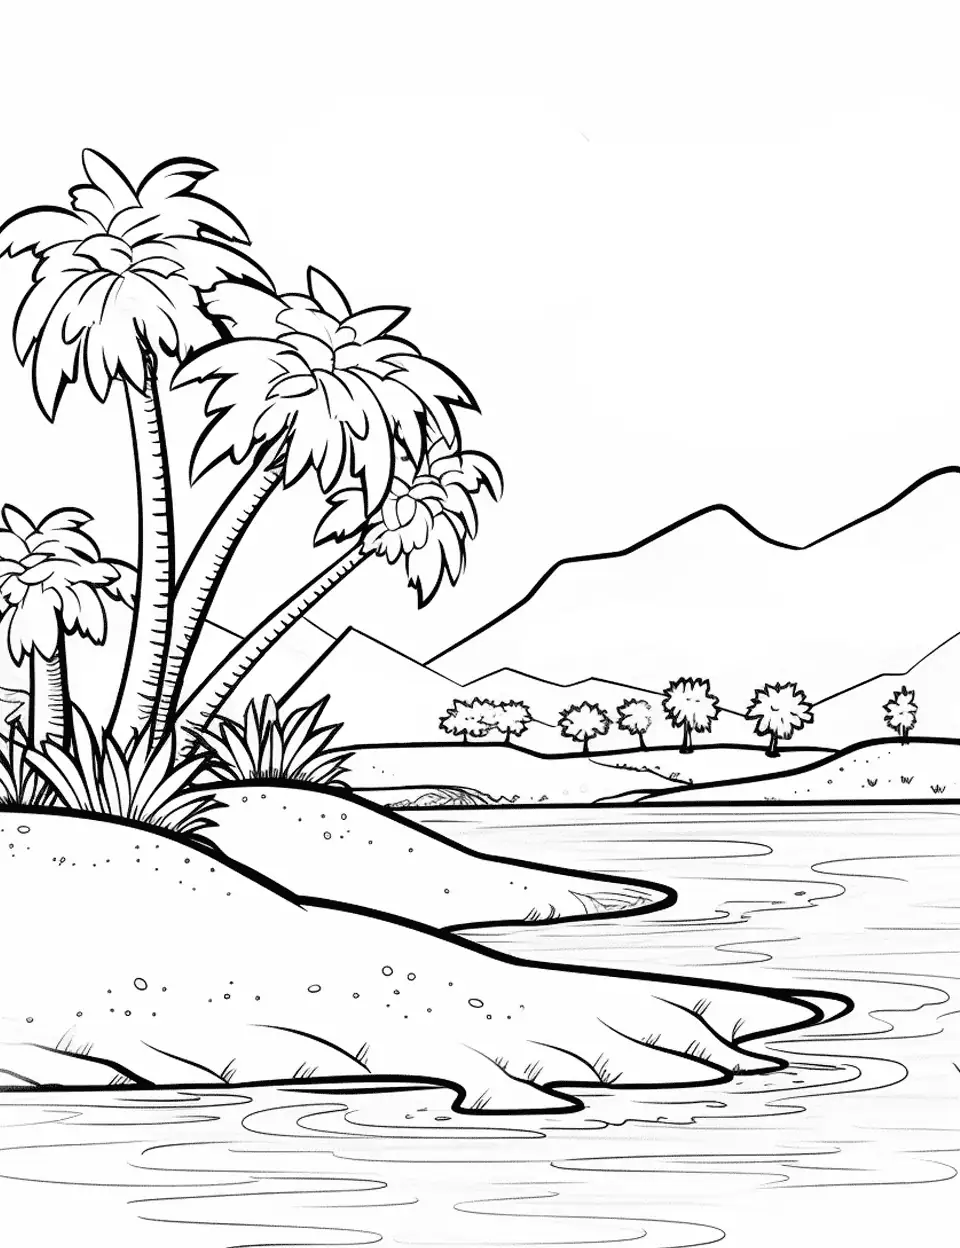 Tropical Island Paradise Coloring Page - A small, uninhabited tropical island with a sandy beach and coconut trees.